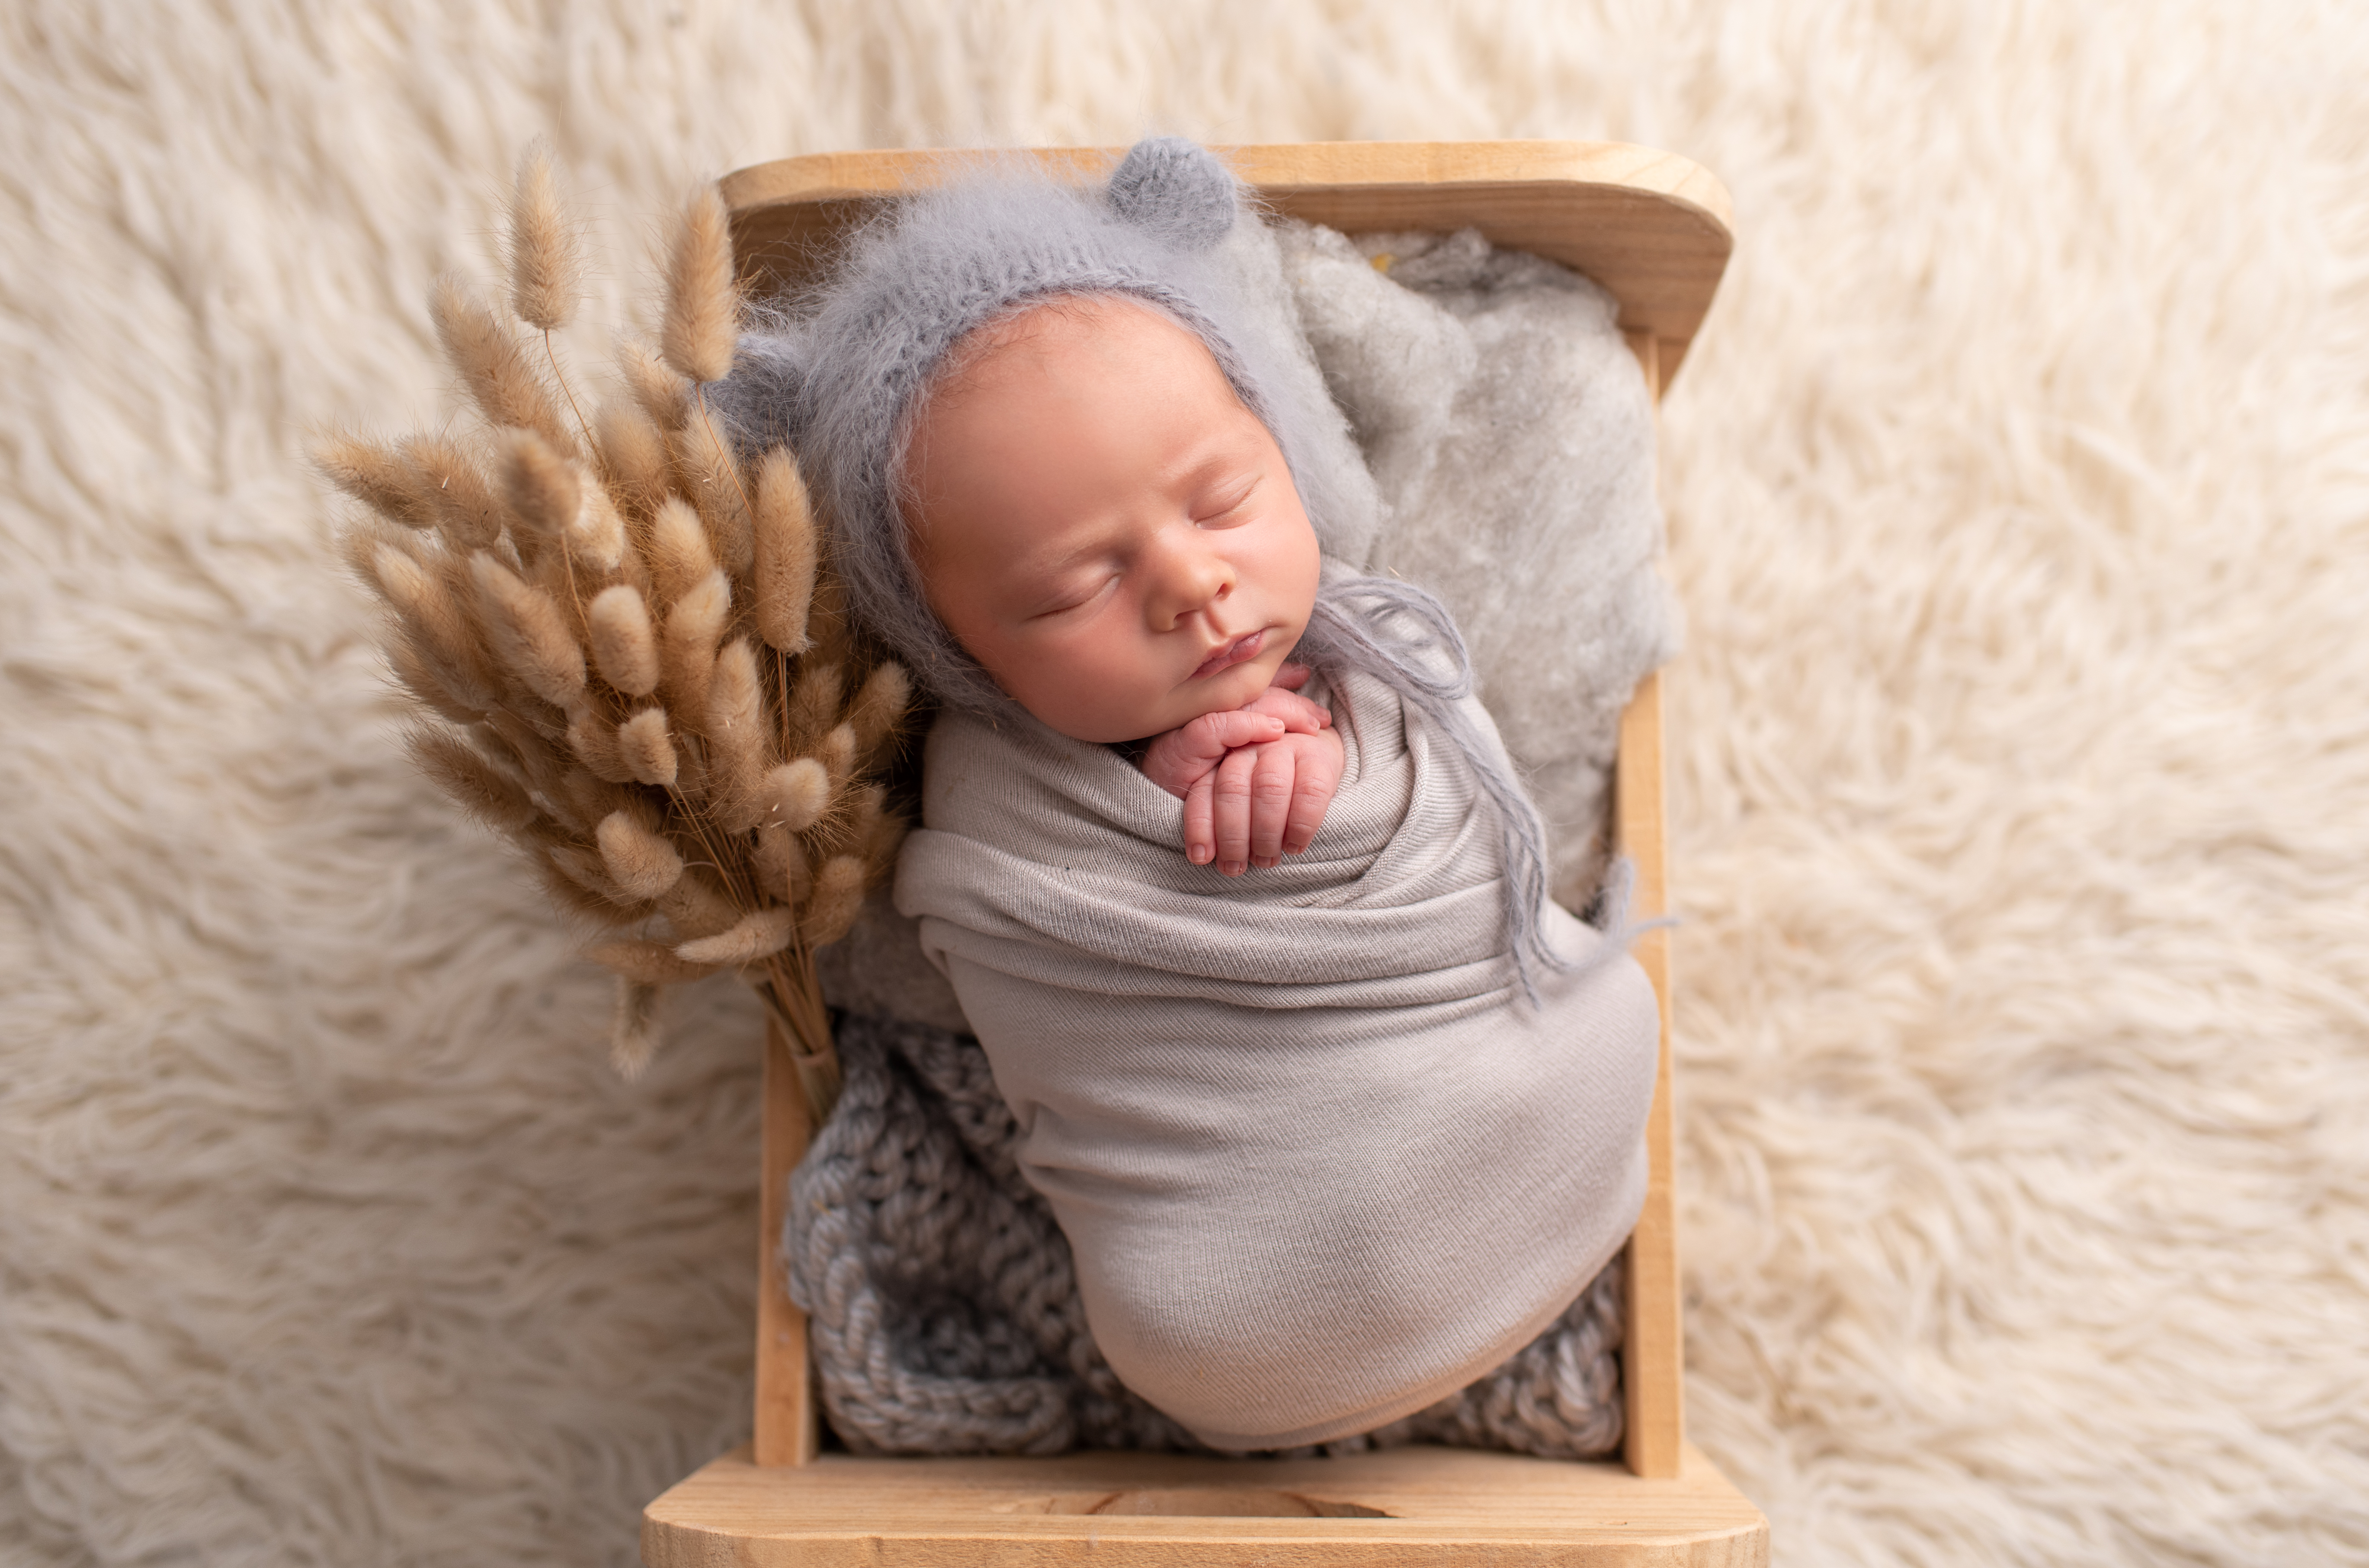 This is a newborn photography image of a newborn baby in wooden bed and bear hat